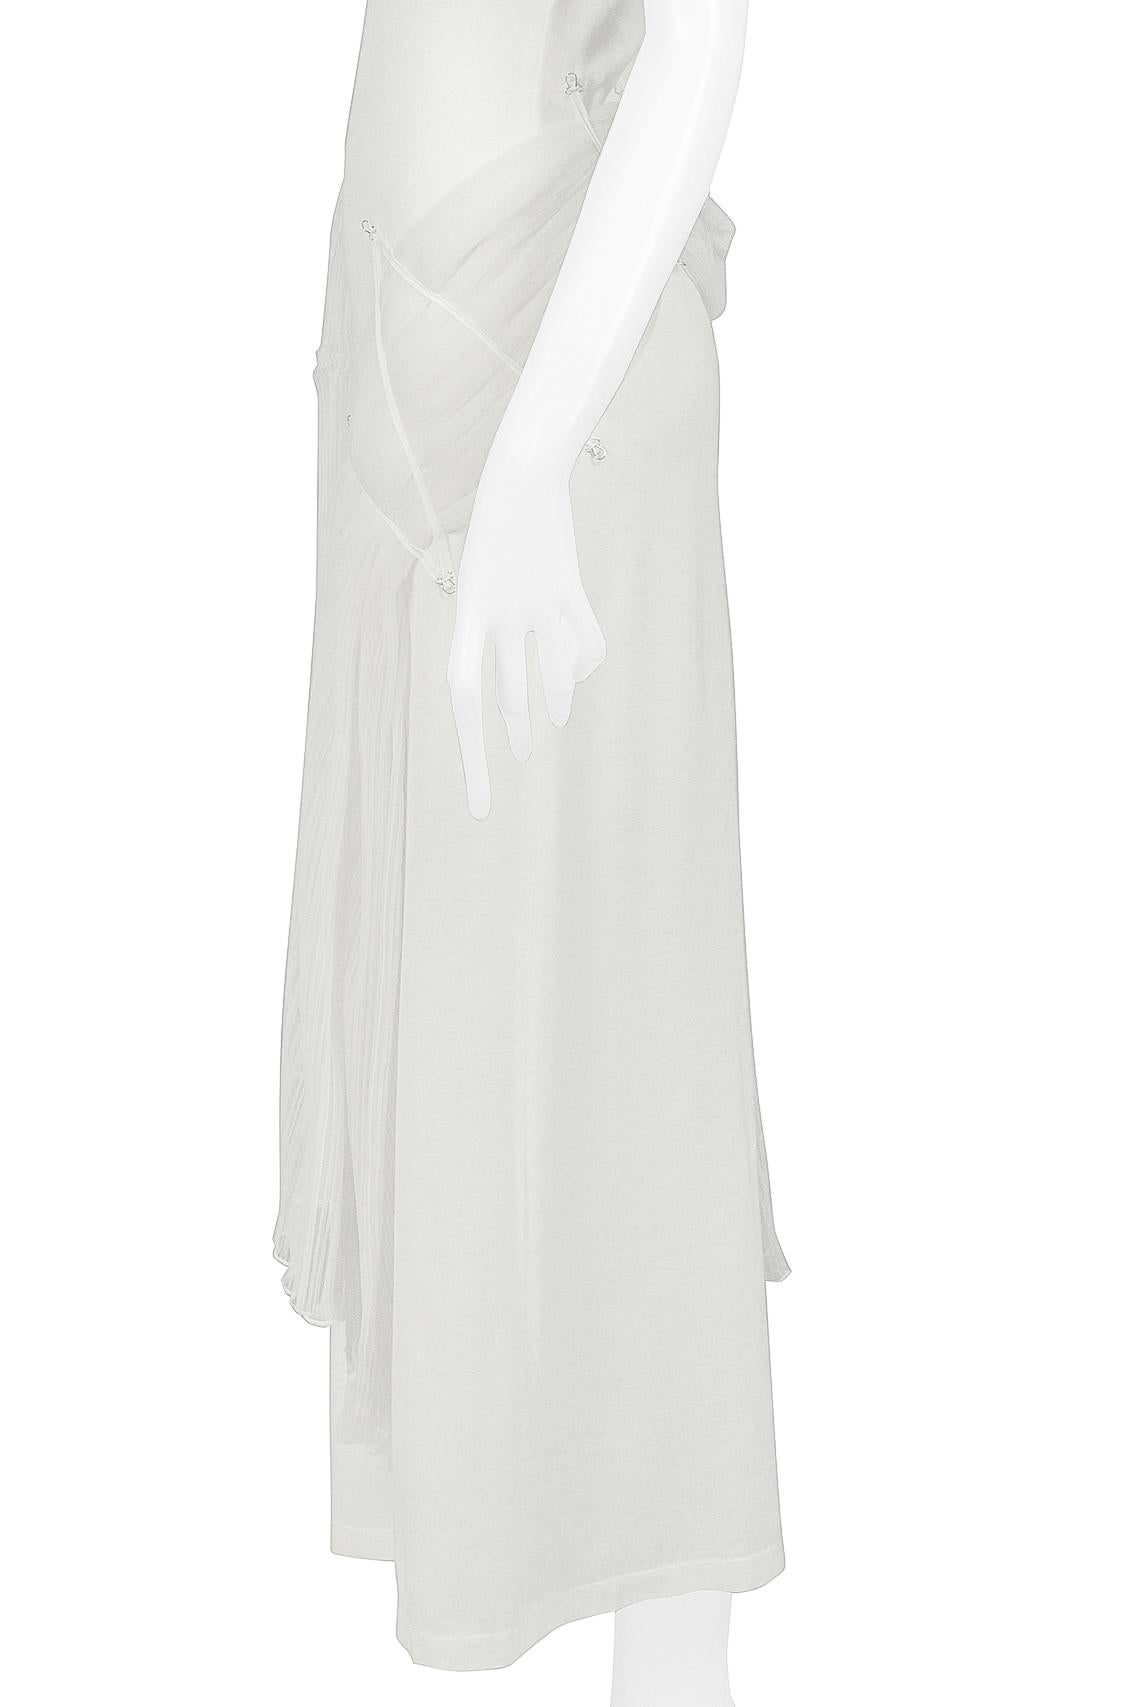 Issey Miyake Iconic White Goddess Concept Dress 2003 For Sale 5